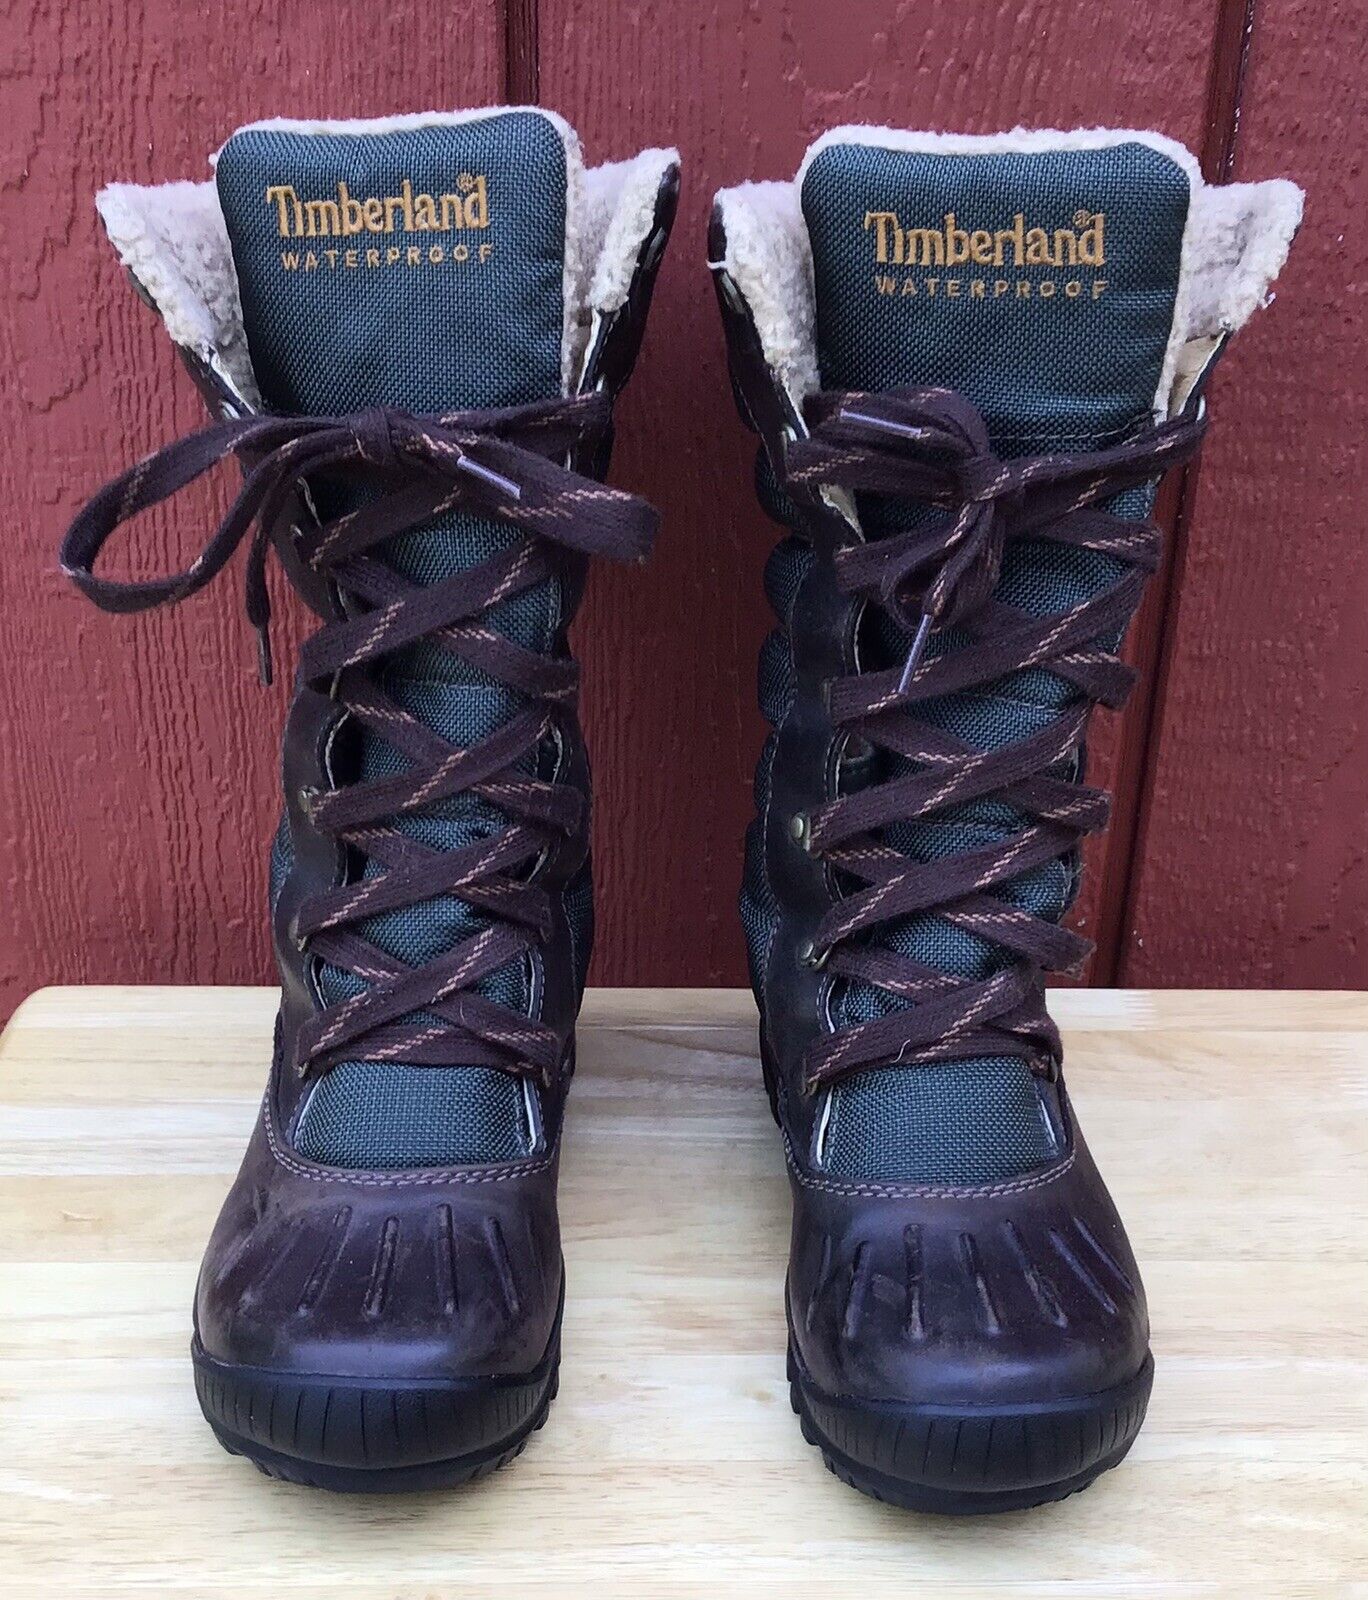 consensus Bishop Semblance Timberland Women's Size 6.5M Mount Holly Snow Boots Brown Leather  Waterproof | eBay